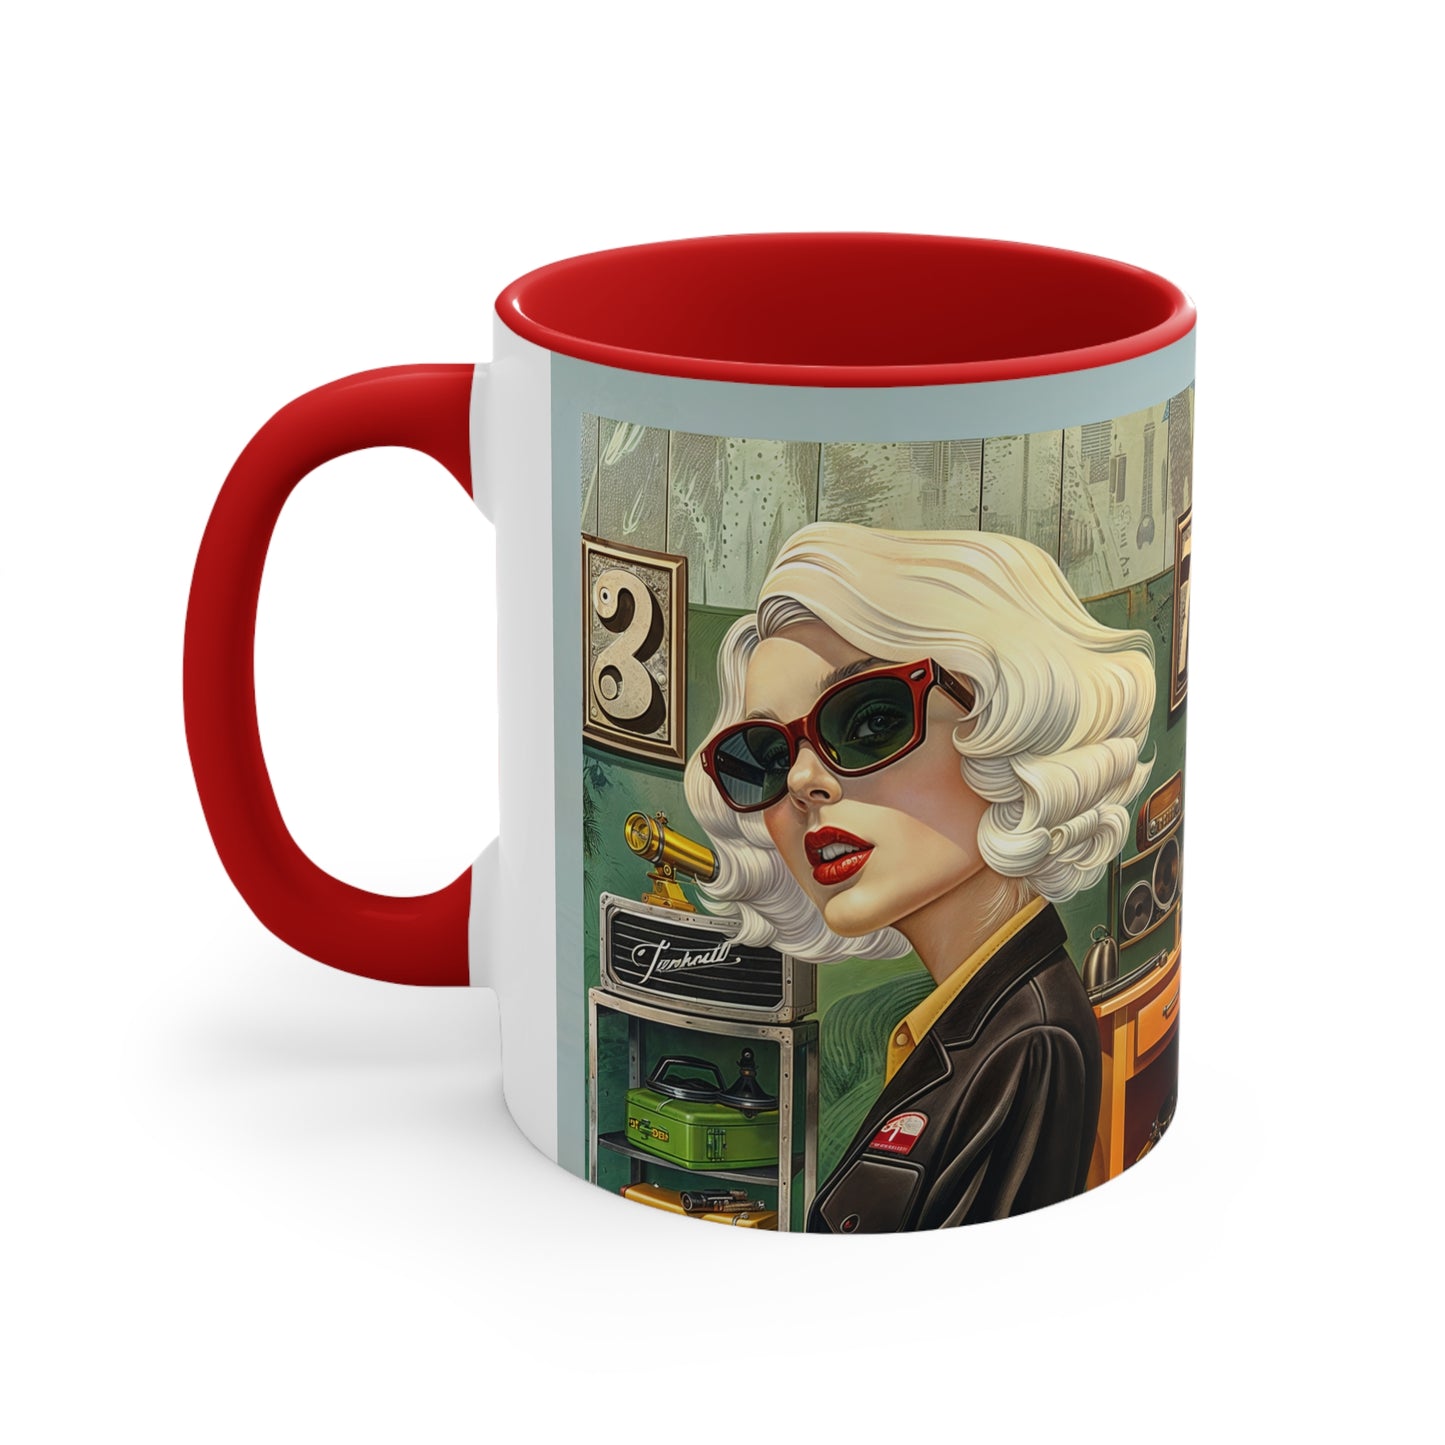 Accent Coffee Mug, 11oz - Tool Time Blonde red side